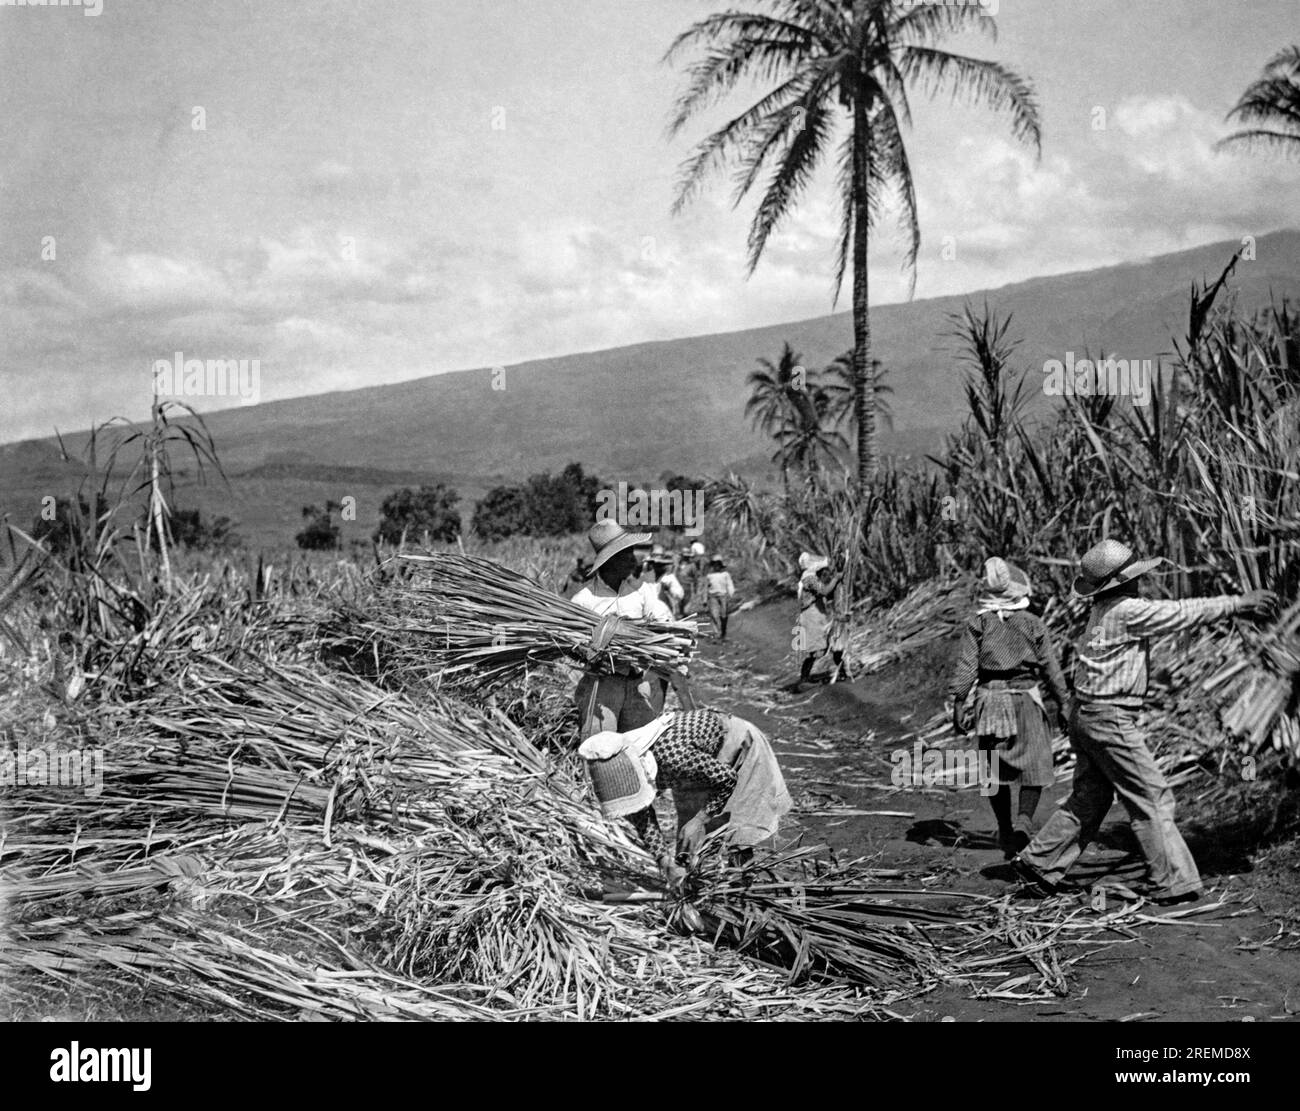 Hawaii:  c. 1937 Native workers harvesting sugar cane on one of the plantations. Stock Photo